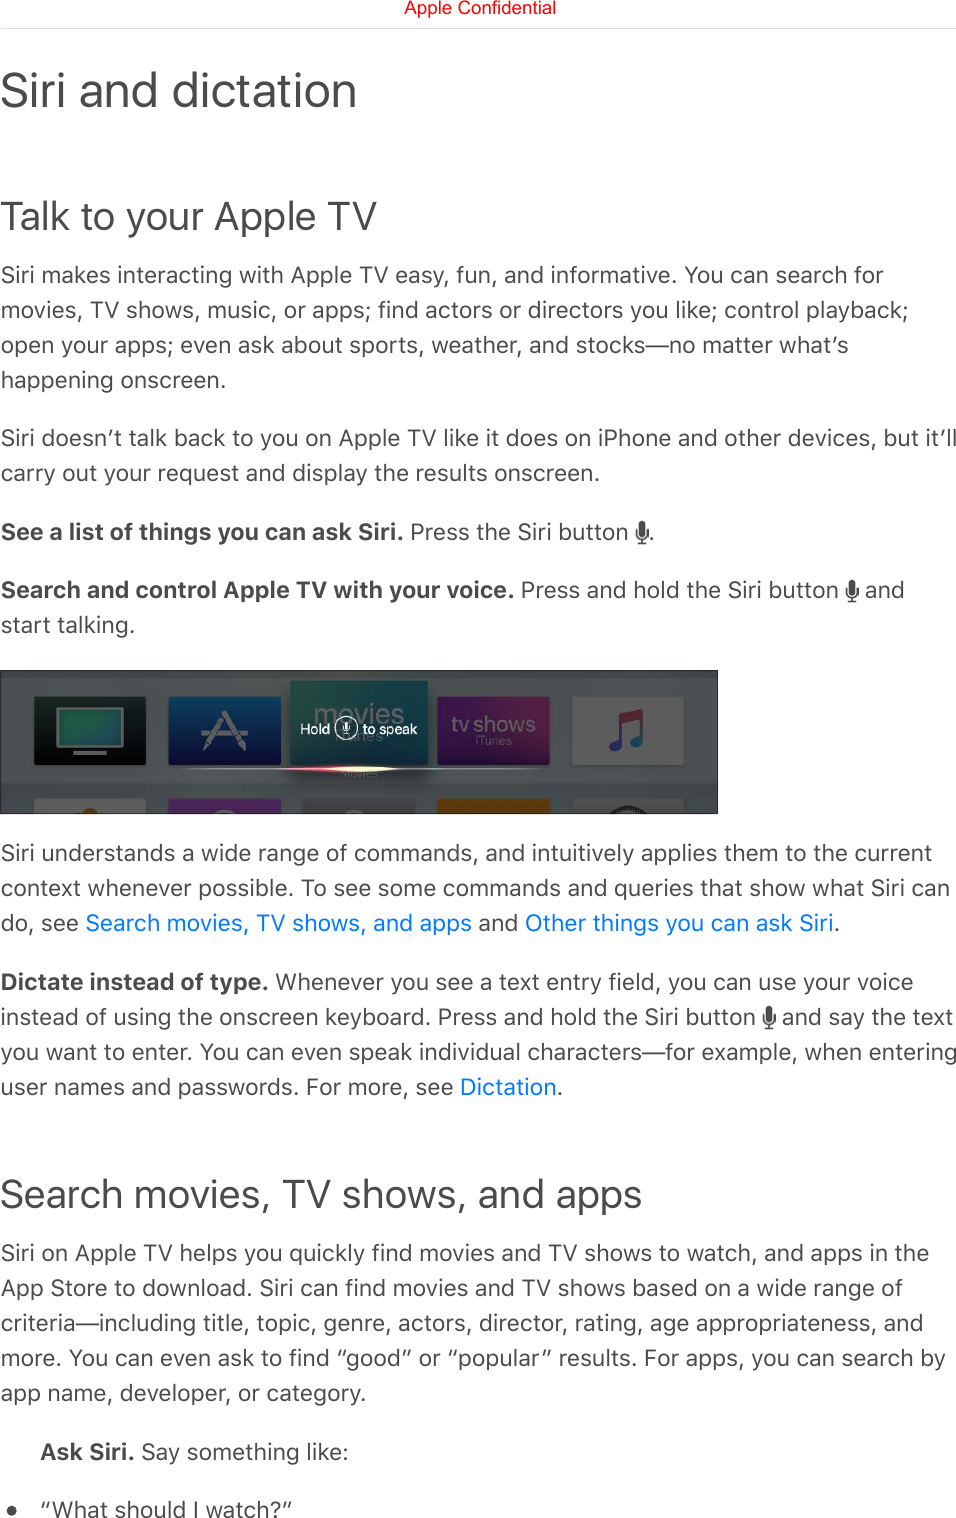 Talk to your Apple TVSiri makes interacting with Apple TV easy, fun, and informative. You can search formovies, TV shows, music, or apps; find actors or directors you like; control playback;open your apps; even ask about sports, weather, and stocks—no matter whatʼshappening onscreen.Siri doesnʼt talk back to you on Apple TV like it does on iPhone and other devices, but itʼllcarry out your request and display the results onscreen.See a list of things you can ask Siri. Press the Siri button  .Search and control Apple TV with your voice. Press and hold the Siri button   andstart talking.Siri understands a wide range of commands, and intuitively applies them to the currentcontext whenever possible. To see some commands and queries that show what Siri cando, see   and  .Dictate instead of type. Whenever you see a text entry field, you can use your voiceinstead of using the onscreen keyboard. Press and hold the Siri button   and say the textyou want to enter. You can even speak individual characters—for example, when enteringuser names and passwords. For more, see  .Search movies, TV shows, and appsSiri on Apple TV helps you quickly find movies and TV shows to watch, and apps in theApp Store to download. Siri can find movies and TV shows based on a wide range ofcriteria—including title, topic, genre, actors, director, rating, age appropriateness, andmore. You can even ask to find “good” or “popular” results. For apps, you can search byapp name, developer, or category.Ask Siri. Say something like:“What should I watch?”Siri and dictationSearch movies, TV shows, and apps Other things you can ask SiriDictationApple Confidential